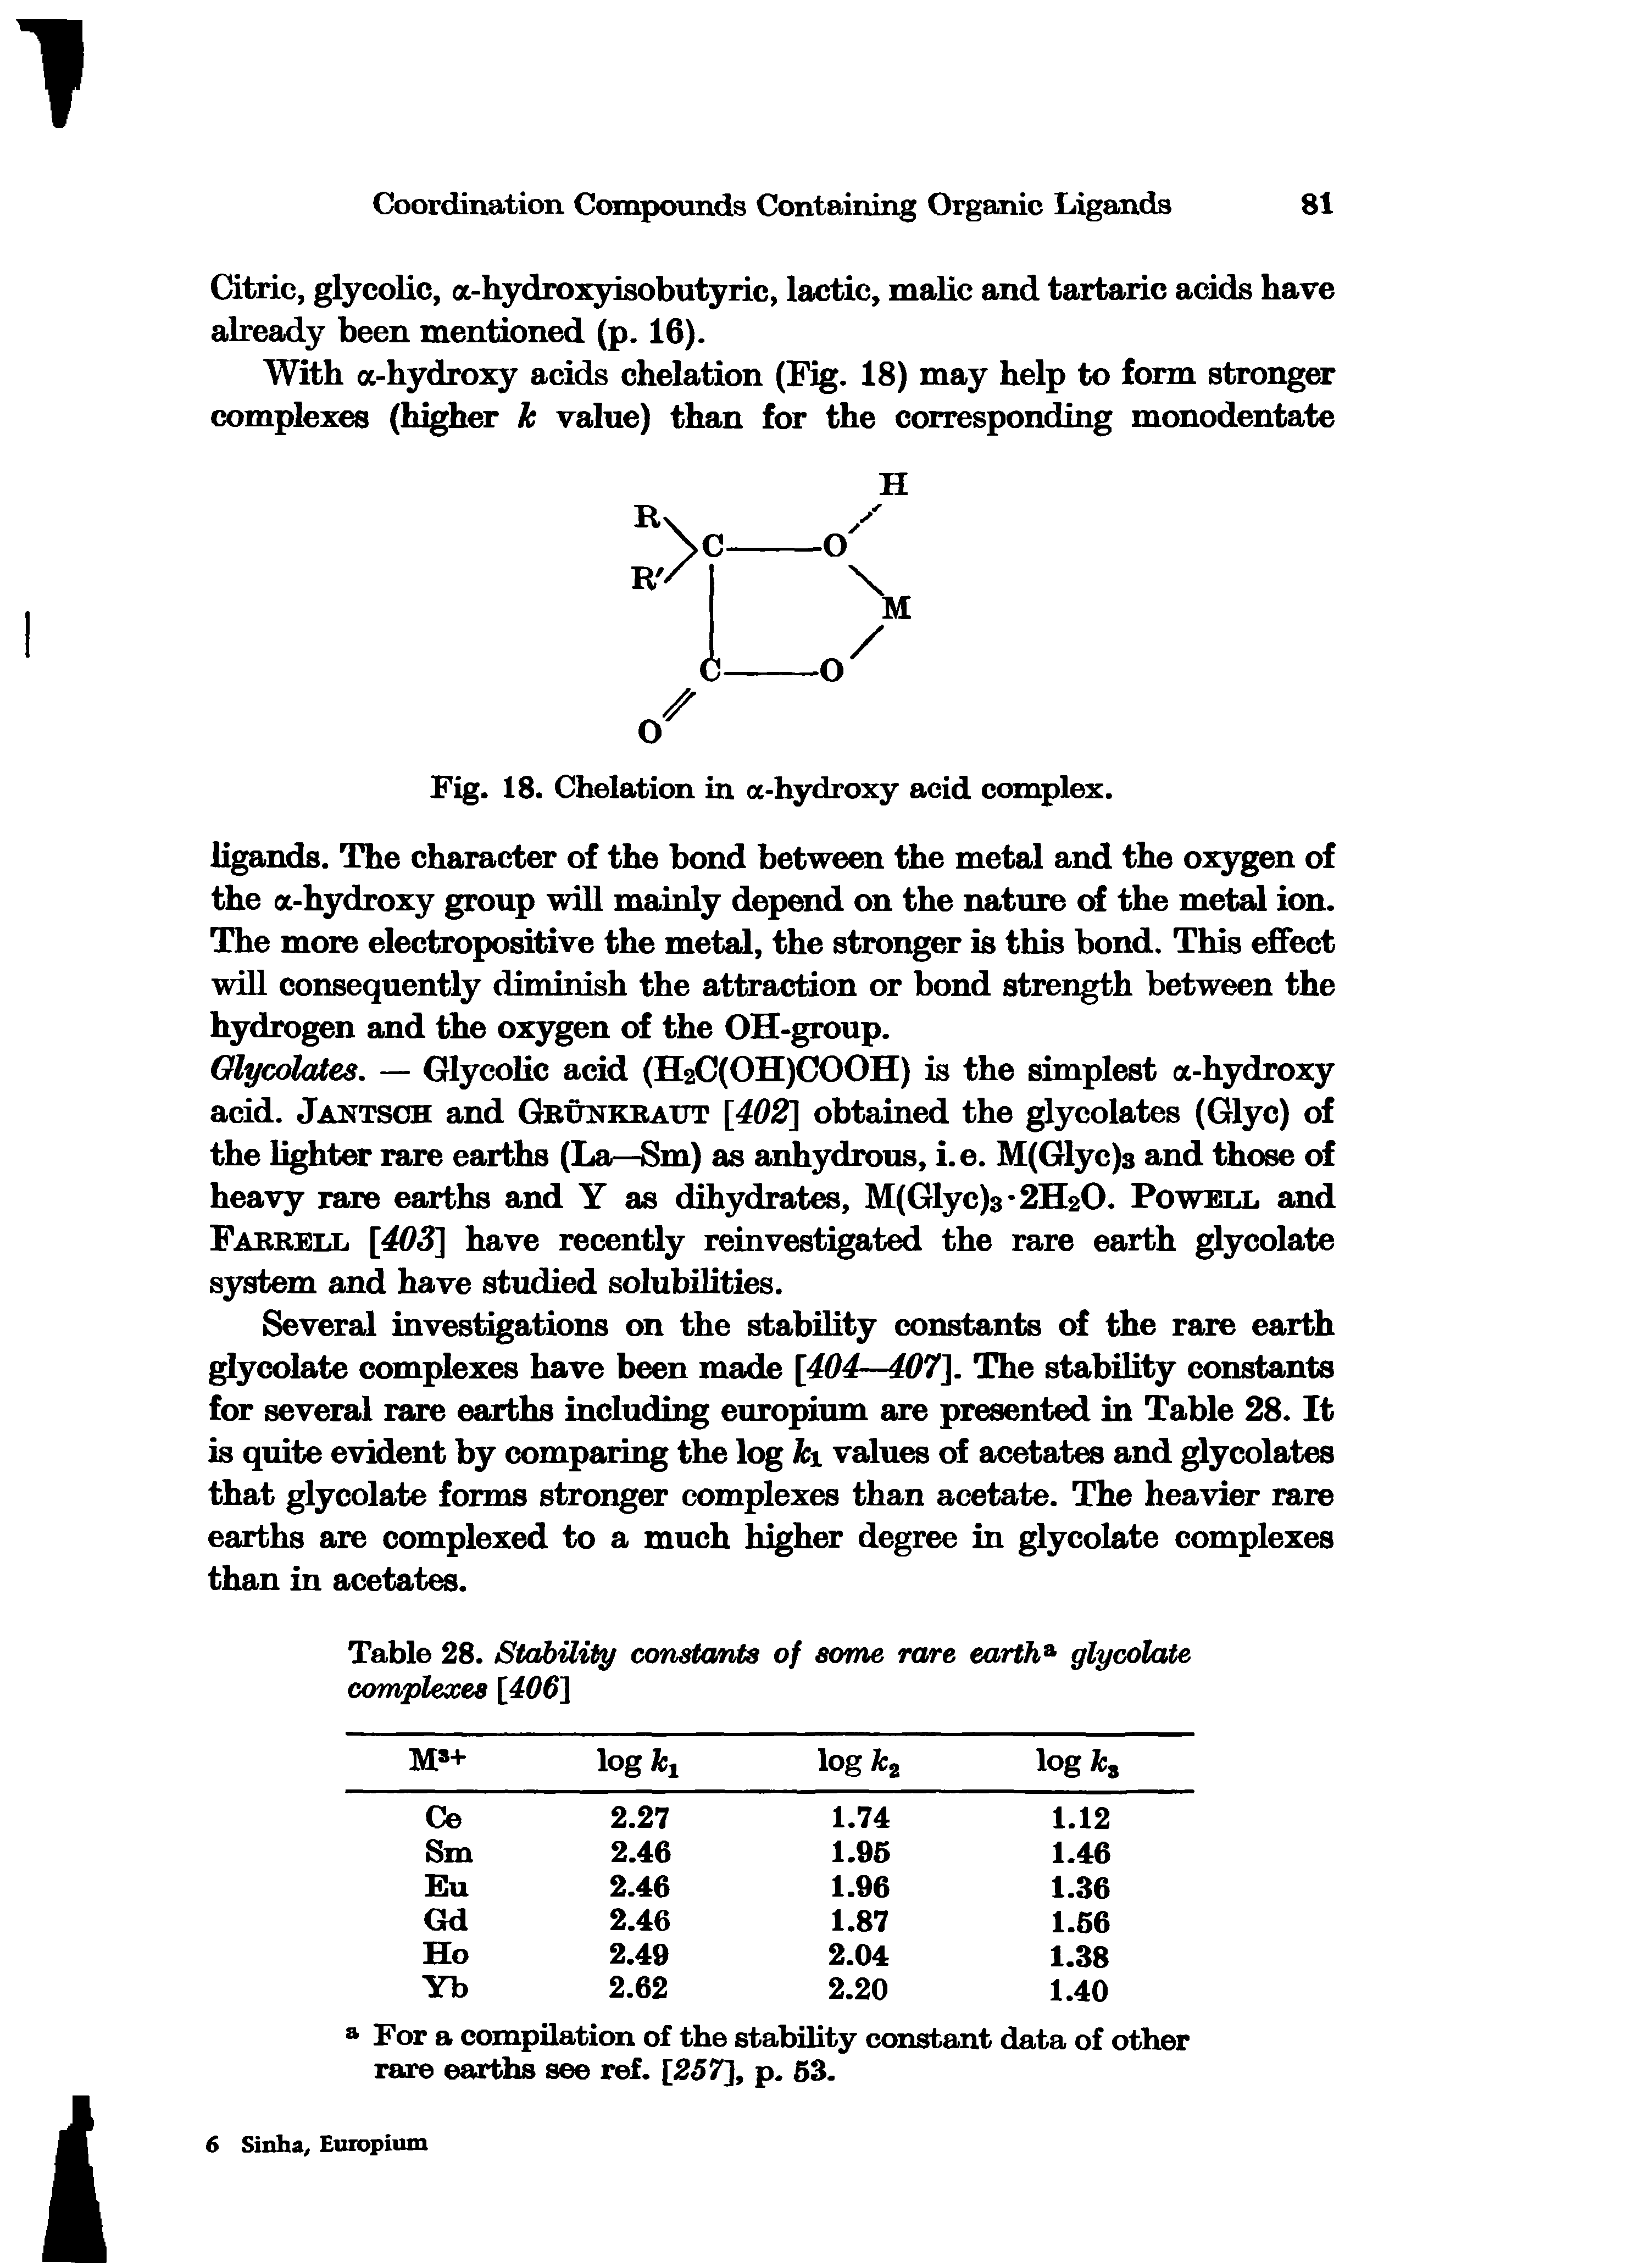 Table 28. Stability constants of some rare eartha glycolate complexes [406]...